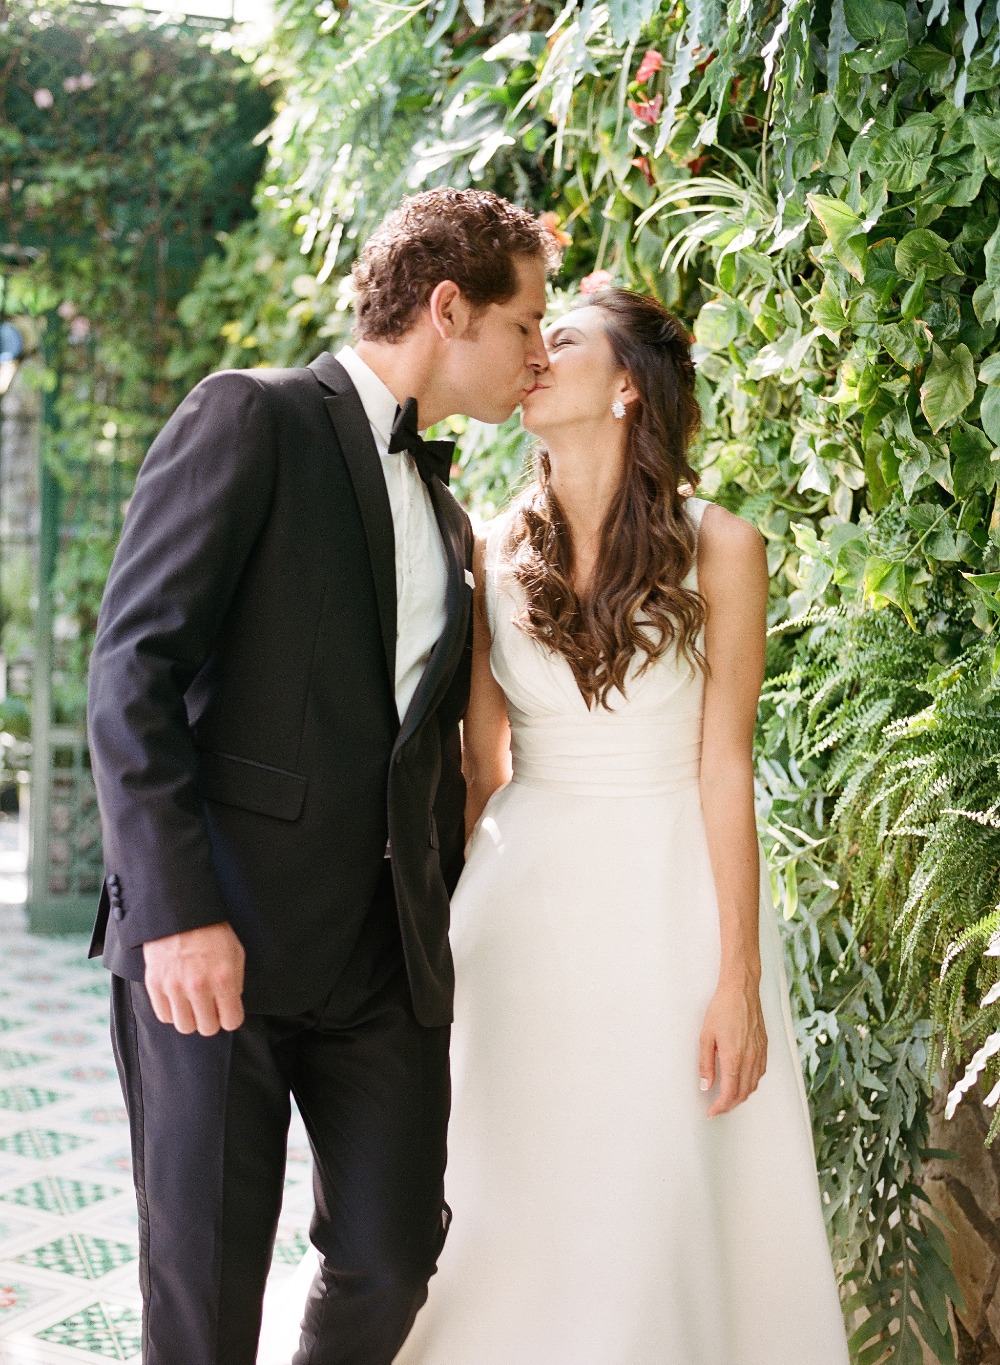 9-ways-to-create-a-wedding-your-guests